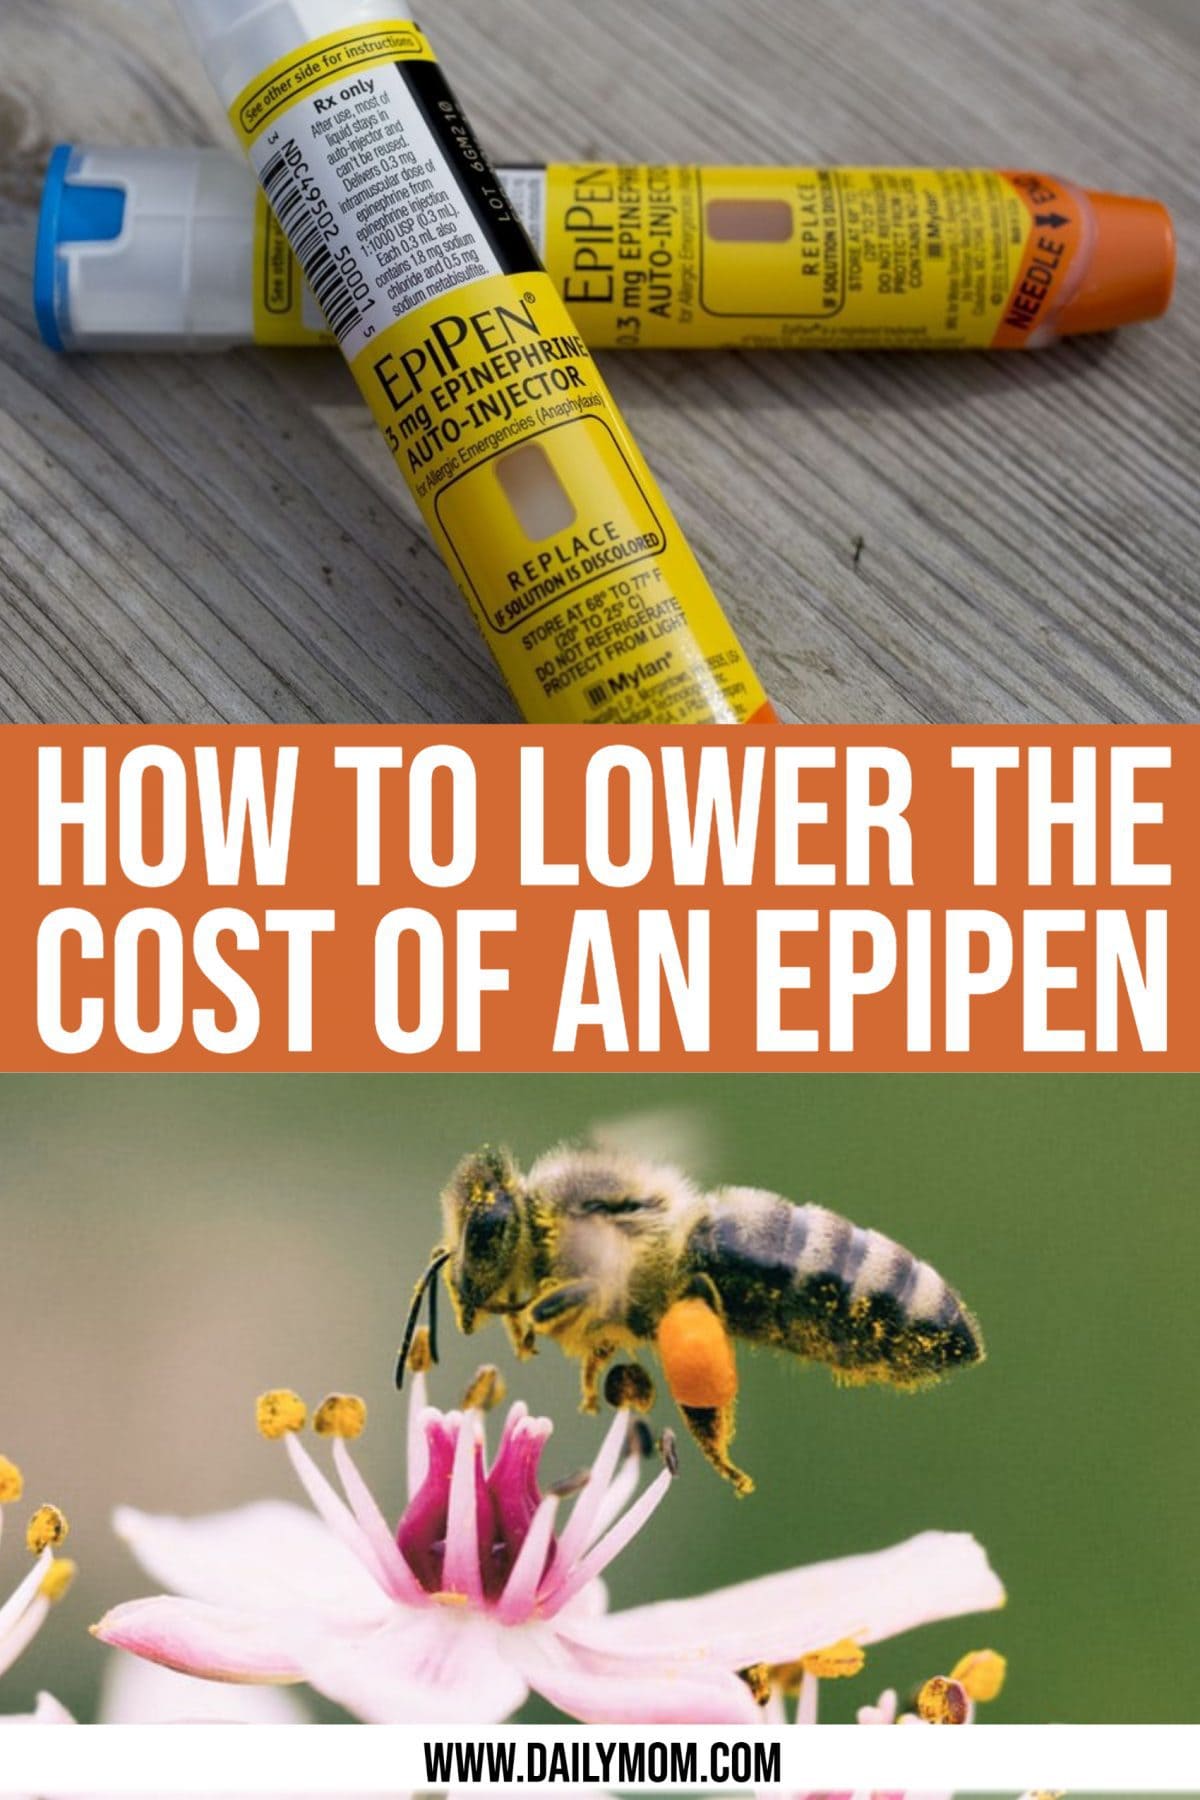 Helpful Tips And Tricks To Lower The Cost Of An Epipen